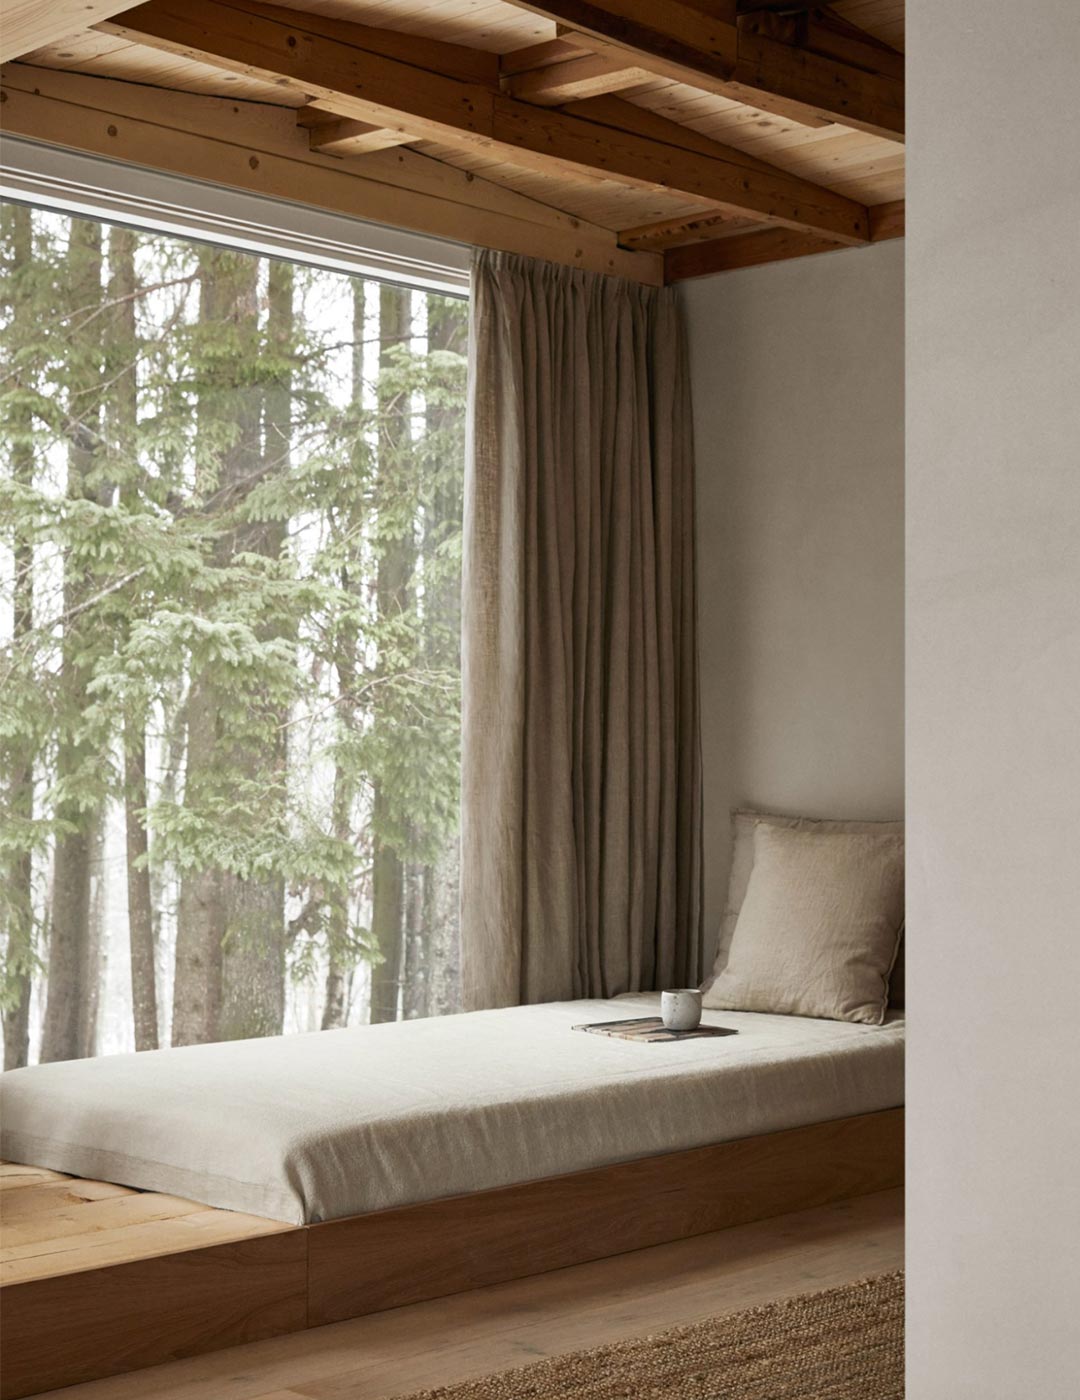 A cozy nook in a cabin designed by Norm Architects that shows a daybed with a large oversized floor to ceiling window with a view of a Forest.